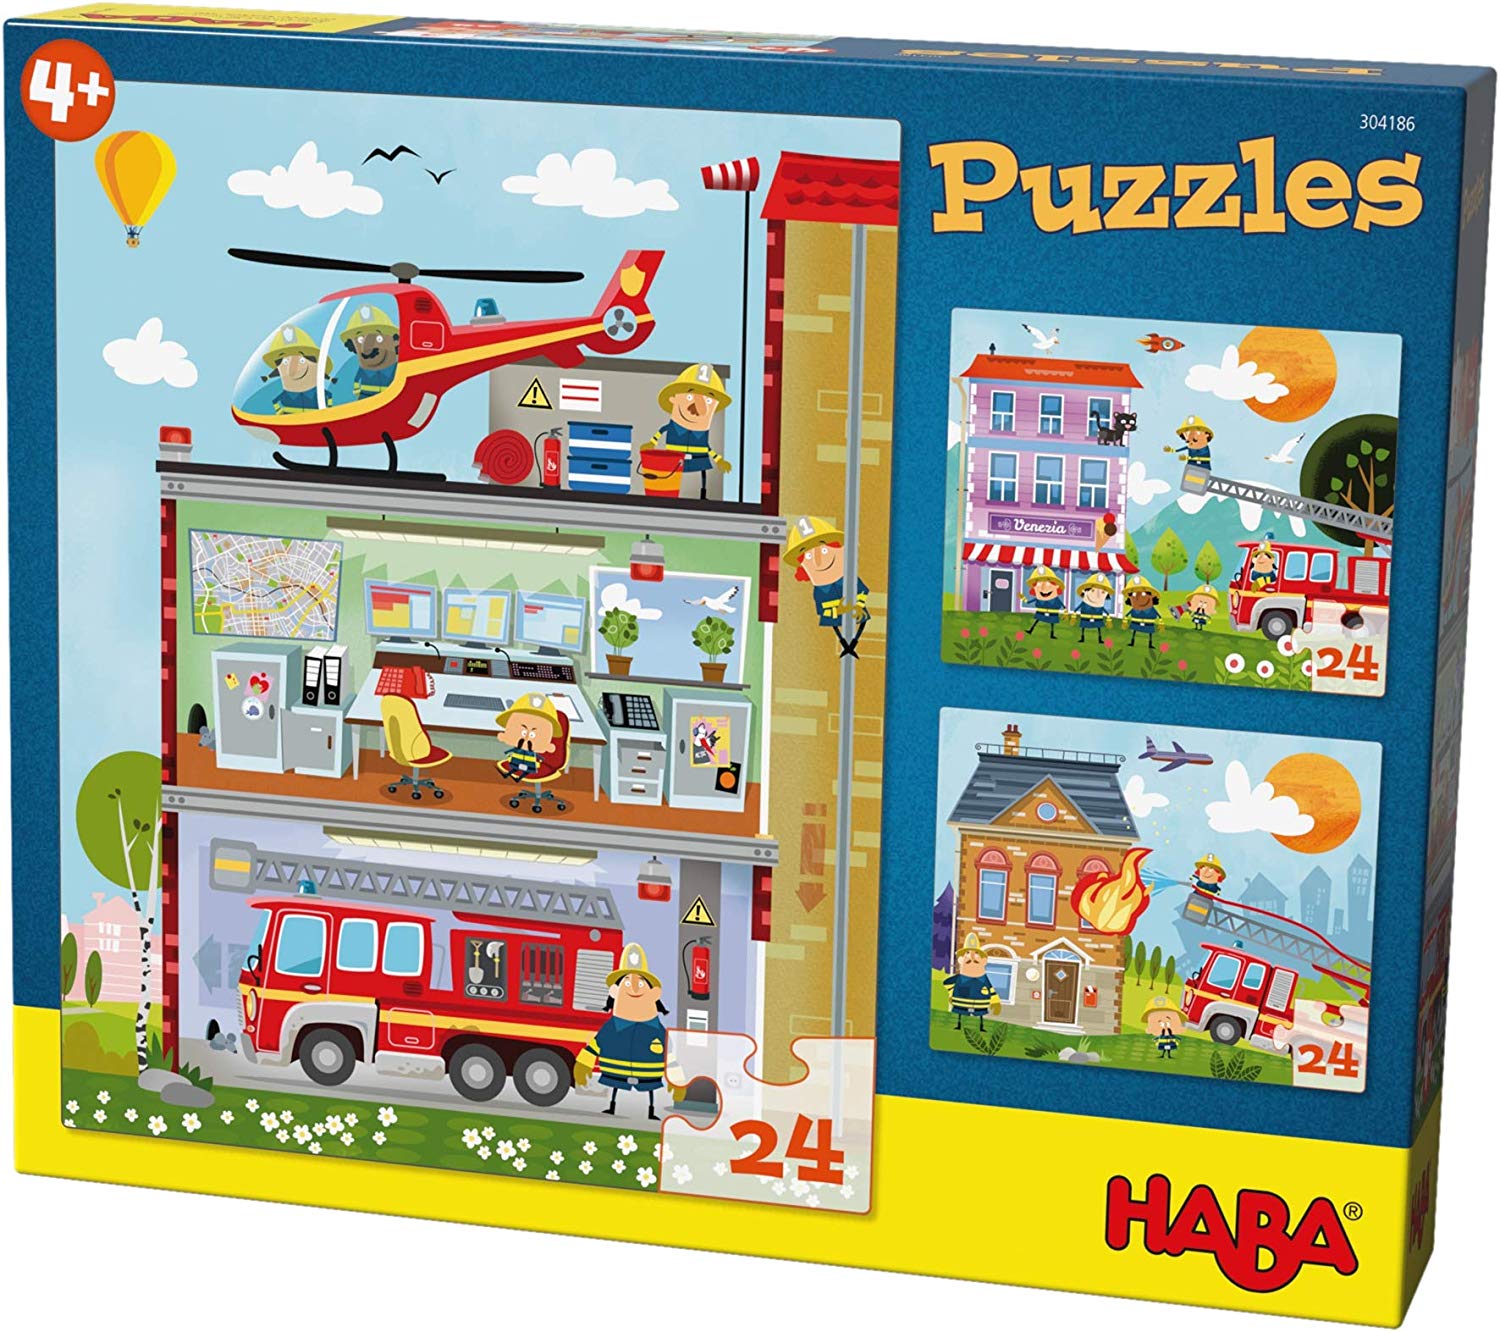 Haba Puzzles Little Fire Brigade. 3 designs each with 24 pieces 304186